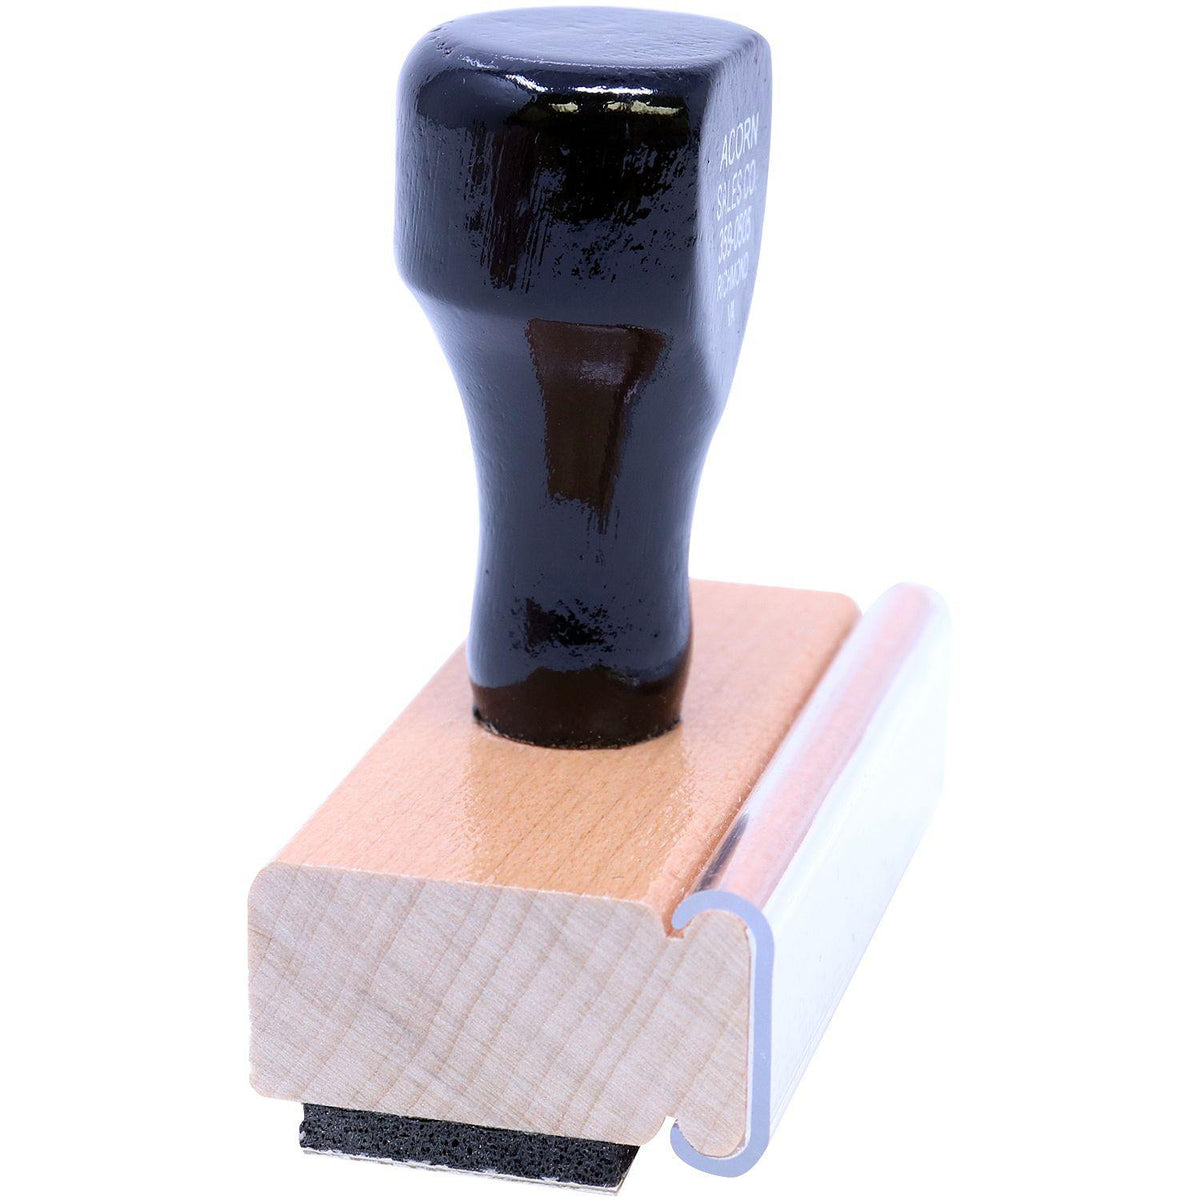 Side View of Large Medicare And Insurance Rubber Stamp at an Angle